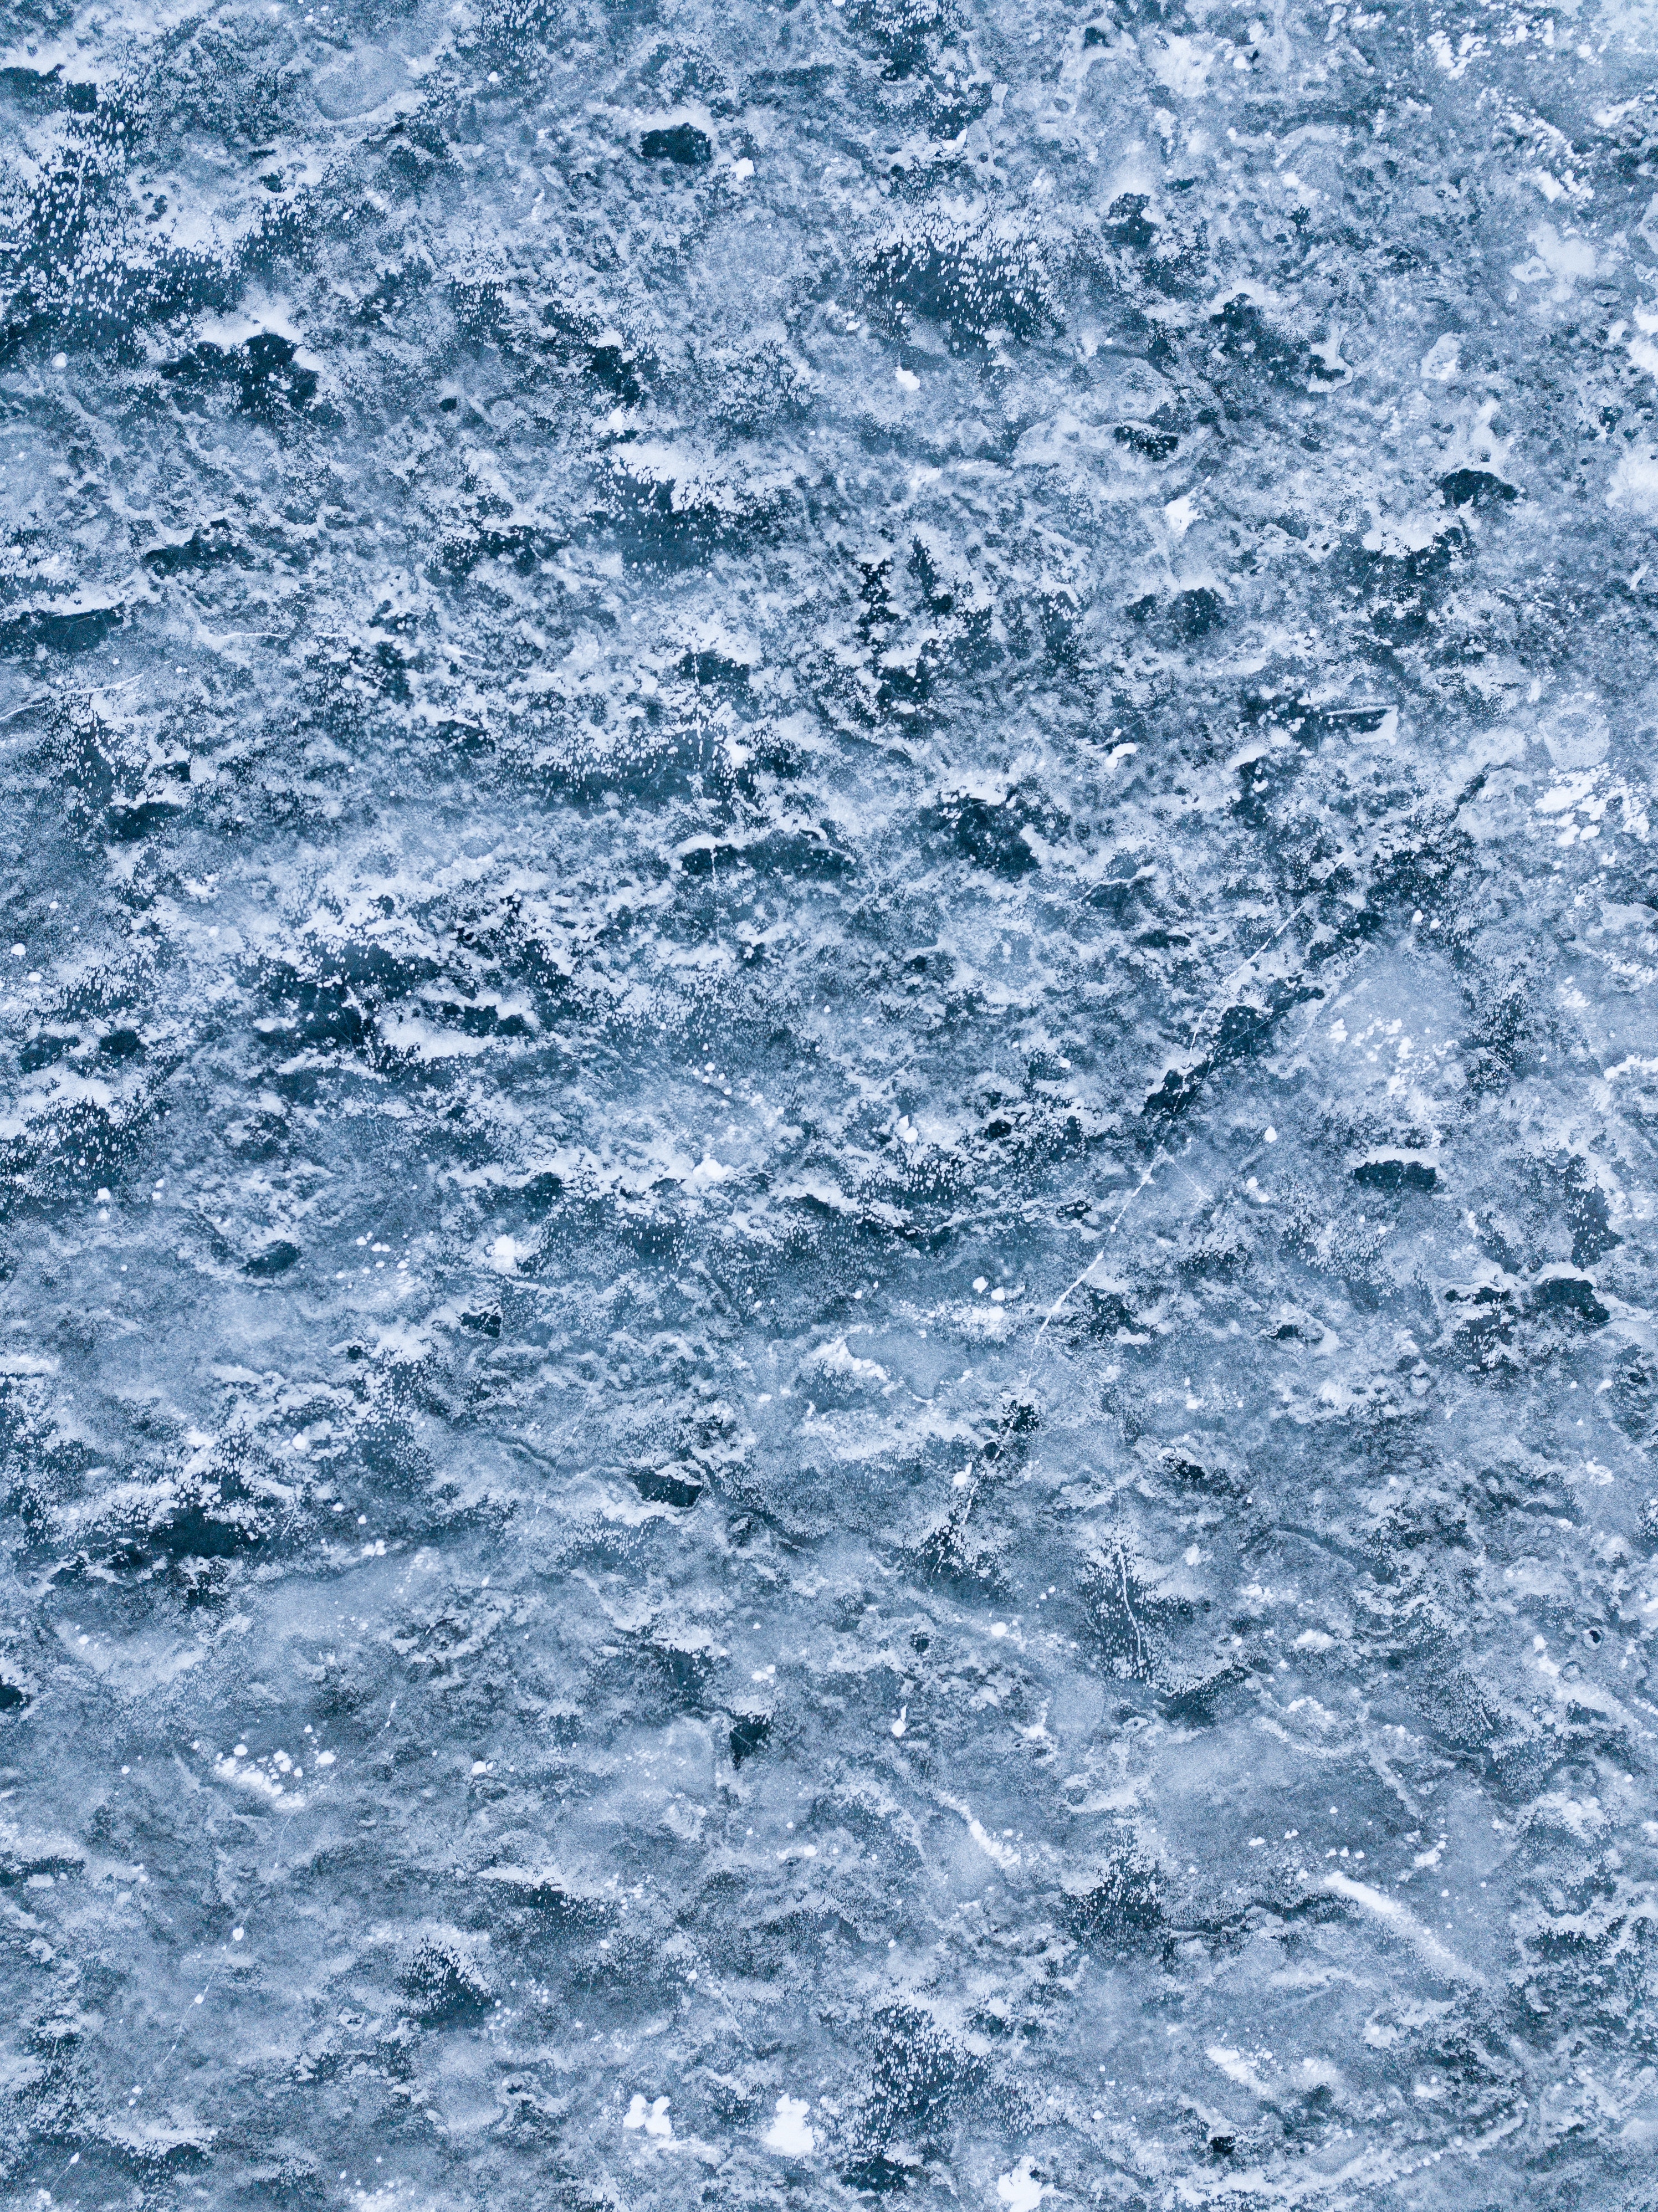 UHD wallpaper textures, surface, snow, ice